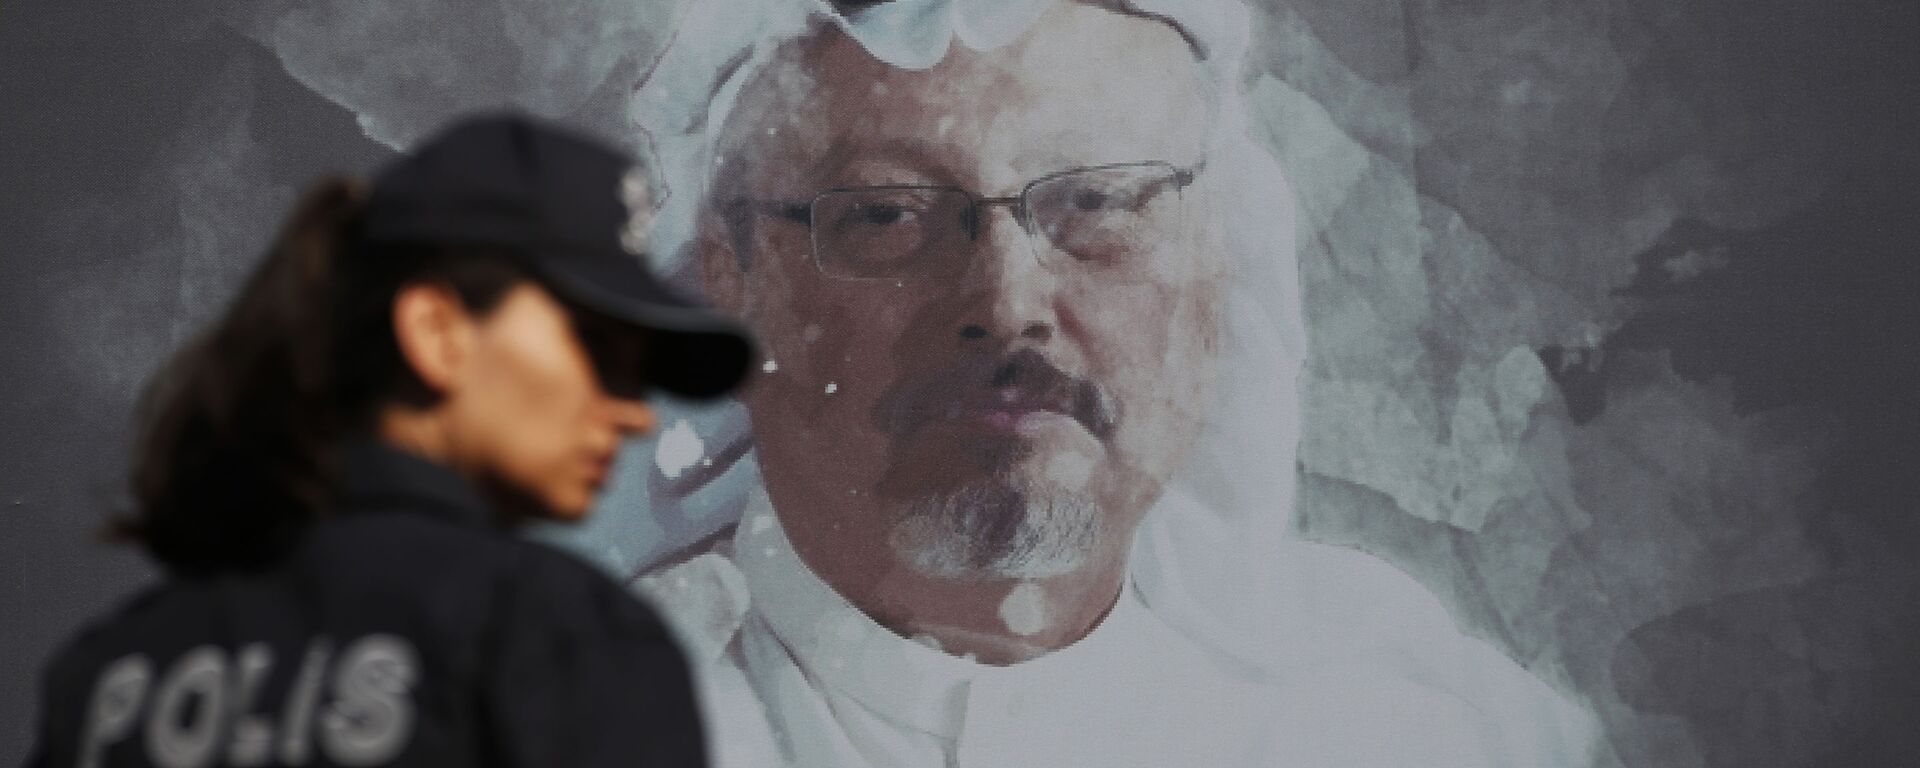 A Turkish police officer walks past a picture of slain Saudi journalist Jamal Khashoggi prior to a ceremony, near the Saudi Arabia consulate in Istanbul, marking the one-year anniversary of his death, Wednesday, Oct. 2, 2019 - Sputnik International, 1920, 07.12.2021